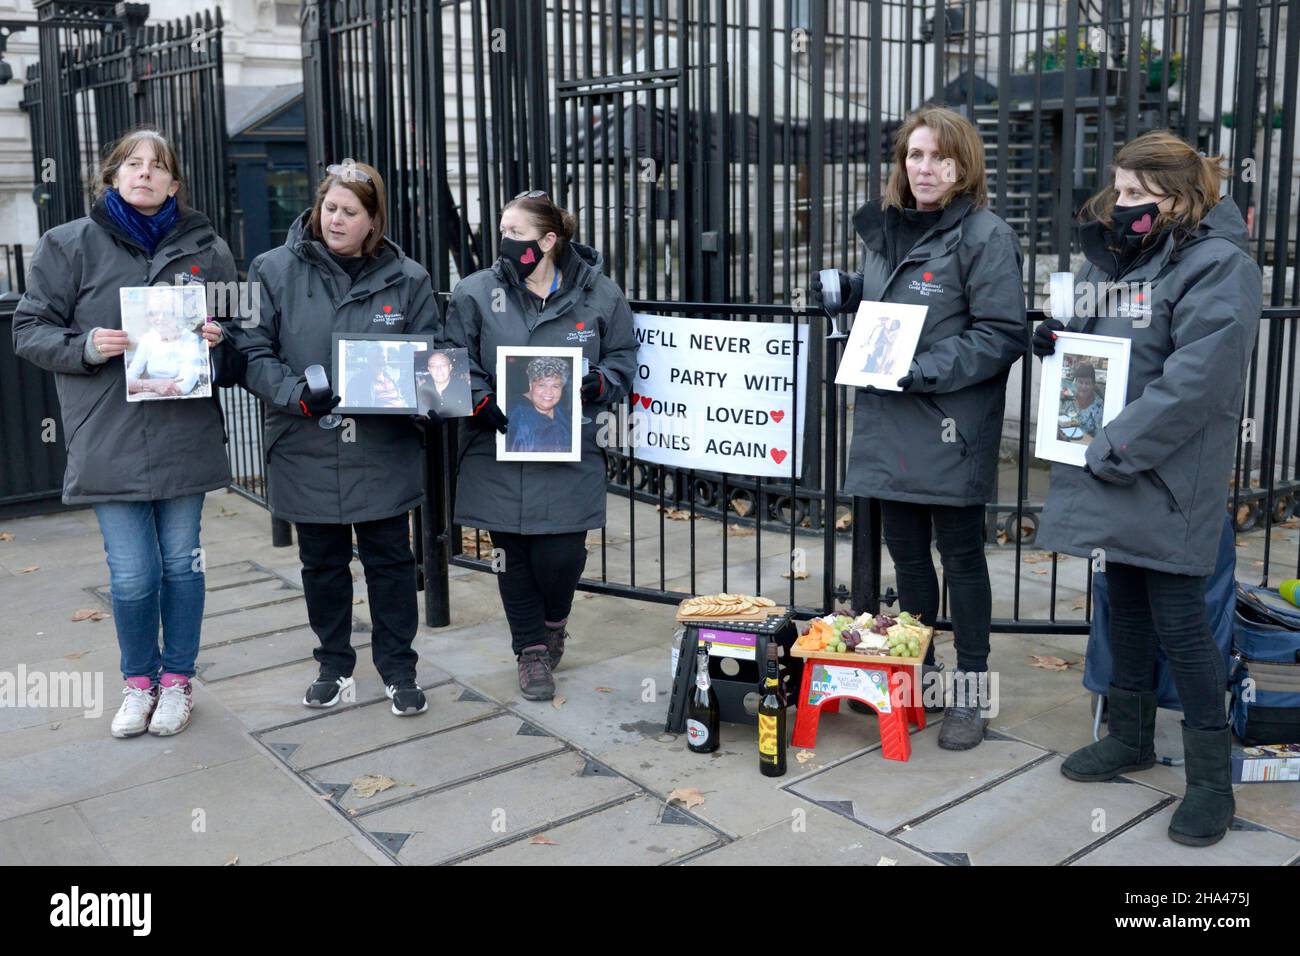 London, UK. 10th Dec, 2021. Members of 'Covid-19 Bereaved Families for Justice' who lost family members during lockdown provide cheese and wine at the gates of Downing Street for passers by as a protest against the parties allegedly held at Number 10 last year. Credit: Phil Robinson/Alamy Live News Stock Photo